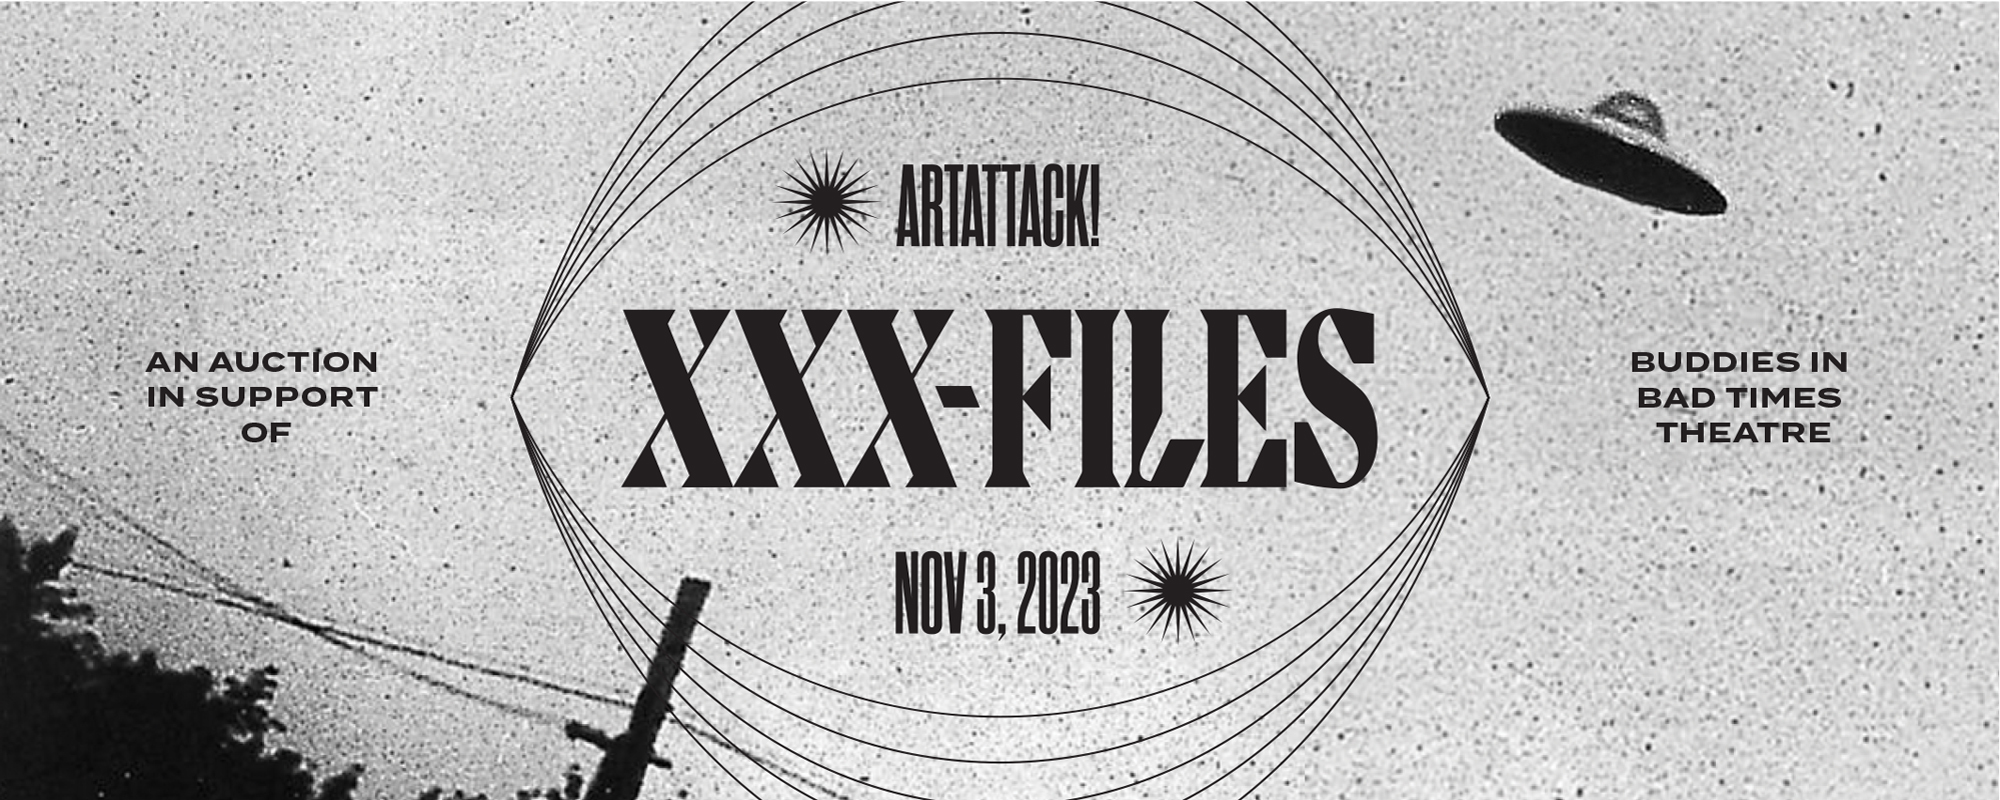 A banner image featuring a grainy photo of a UFO in the sky. Text reads "ArtAttack XXX-Files, Nov 3 2023" and "And Auction in Support of Buddies in Bad Times Theatre"